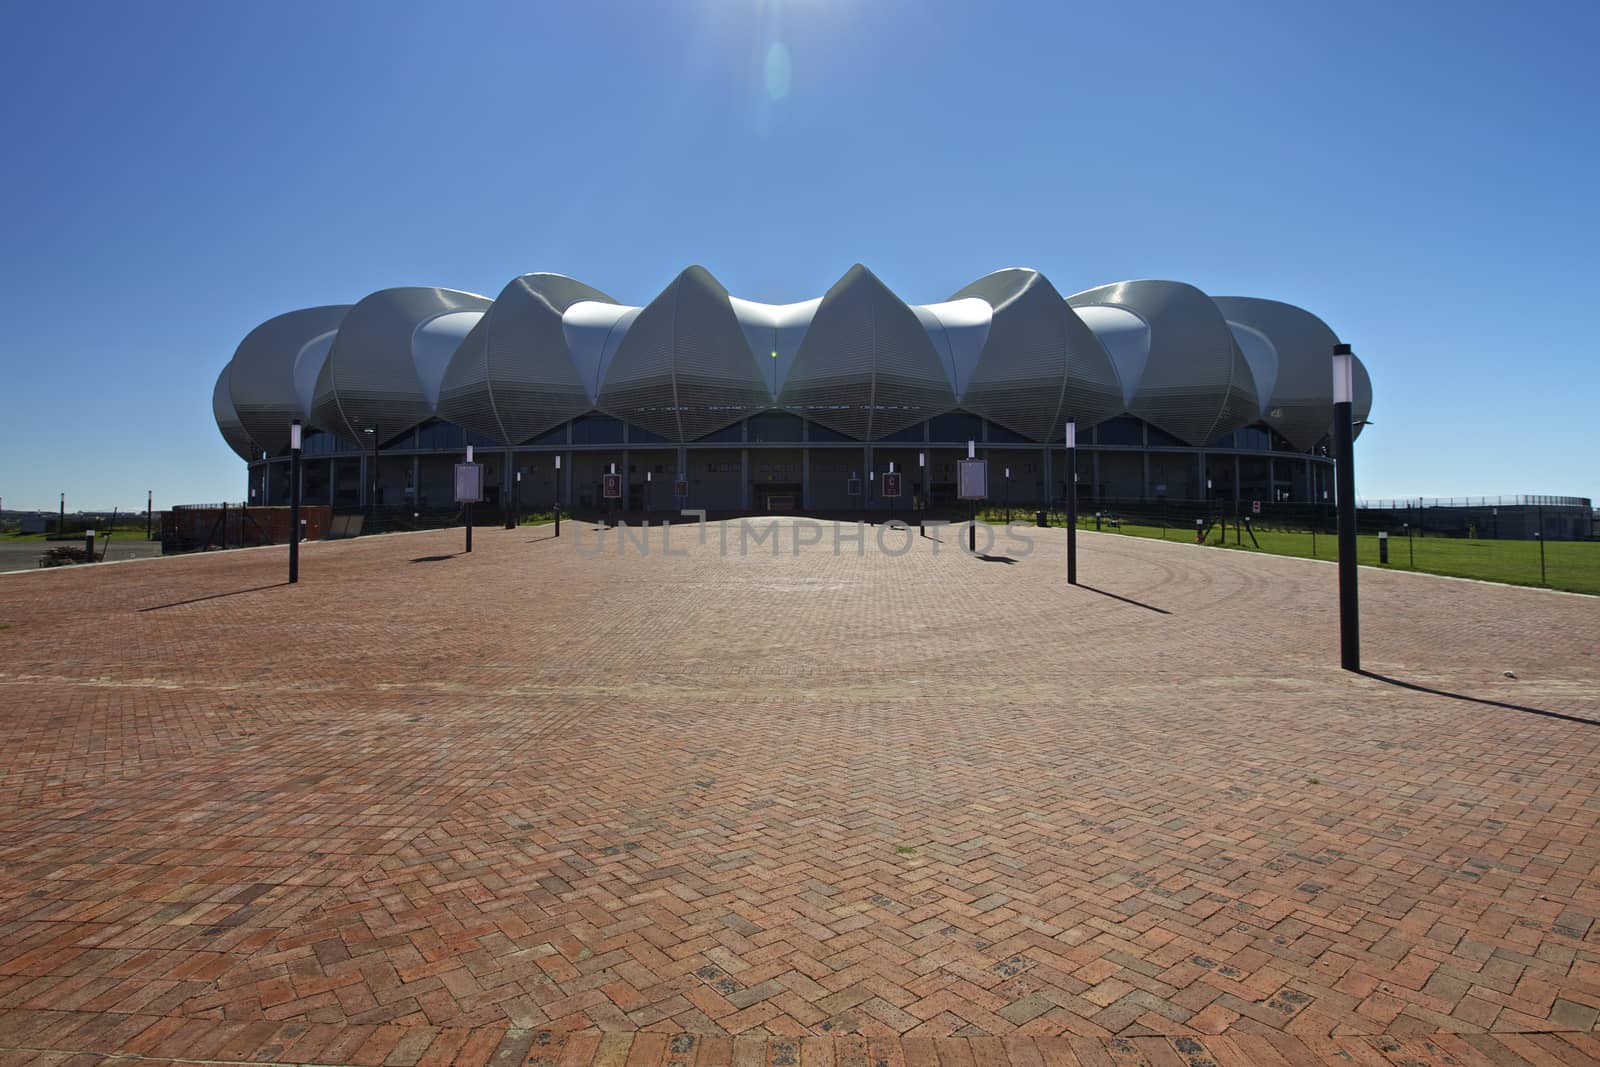 Port Elizabeth's Stadium for the Football World Cup, called Nelson Mandela Bay by instinia